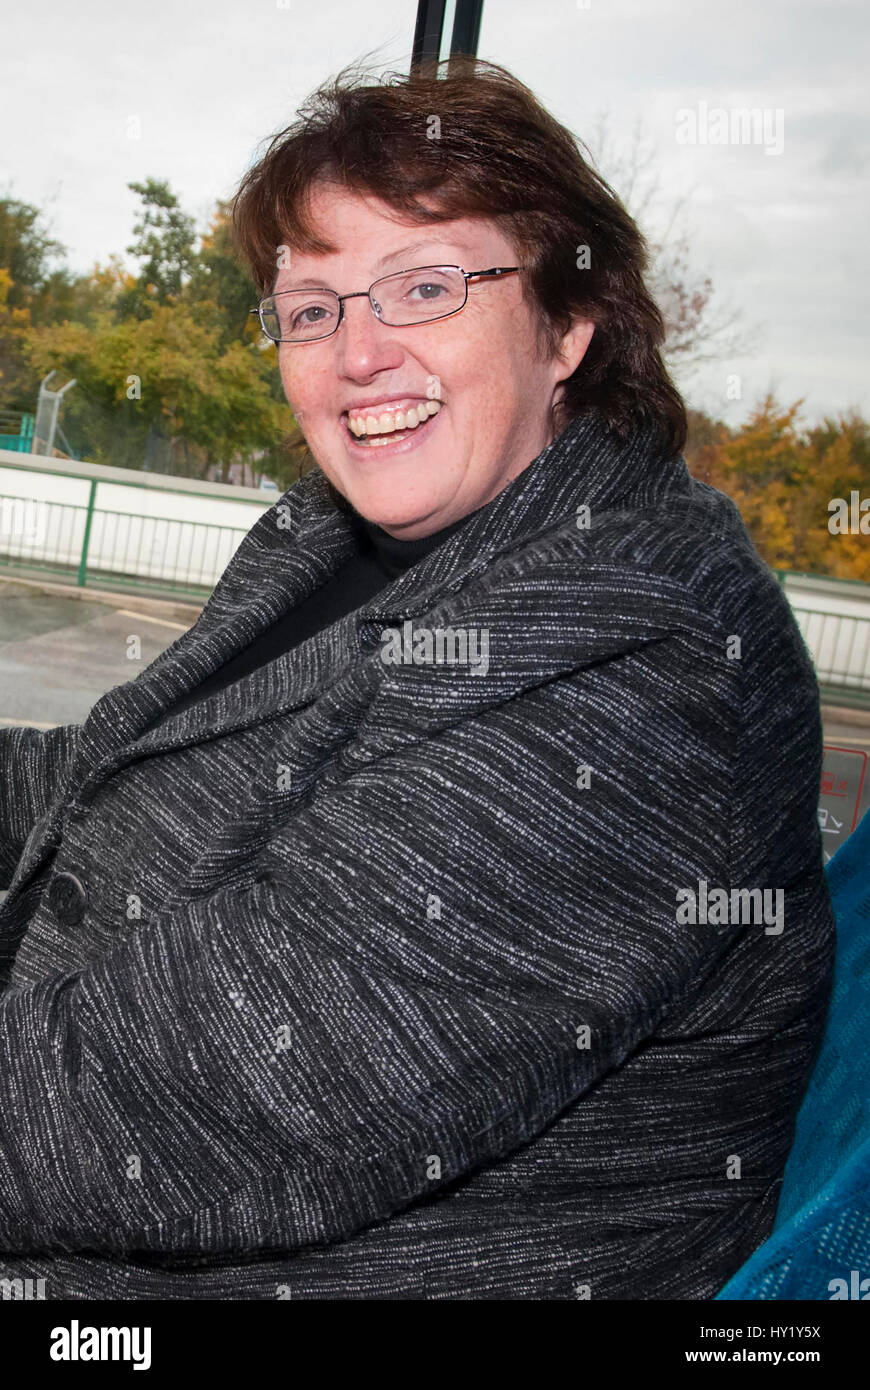 Rosie Cooper M.P. Rosemary Elizabeth Cooper is a British Labour Party politician, who has been the Member of Parliament for West Lancashire since 2005 Stock Photo